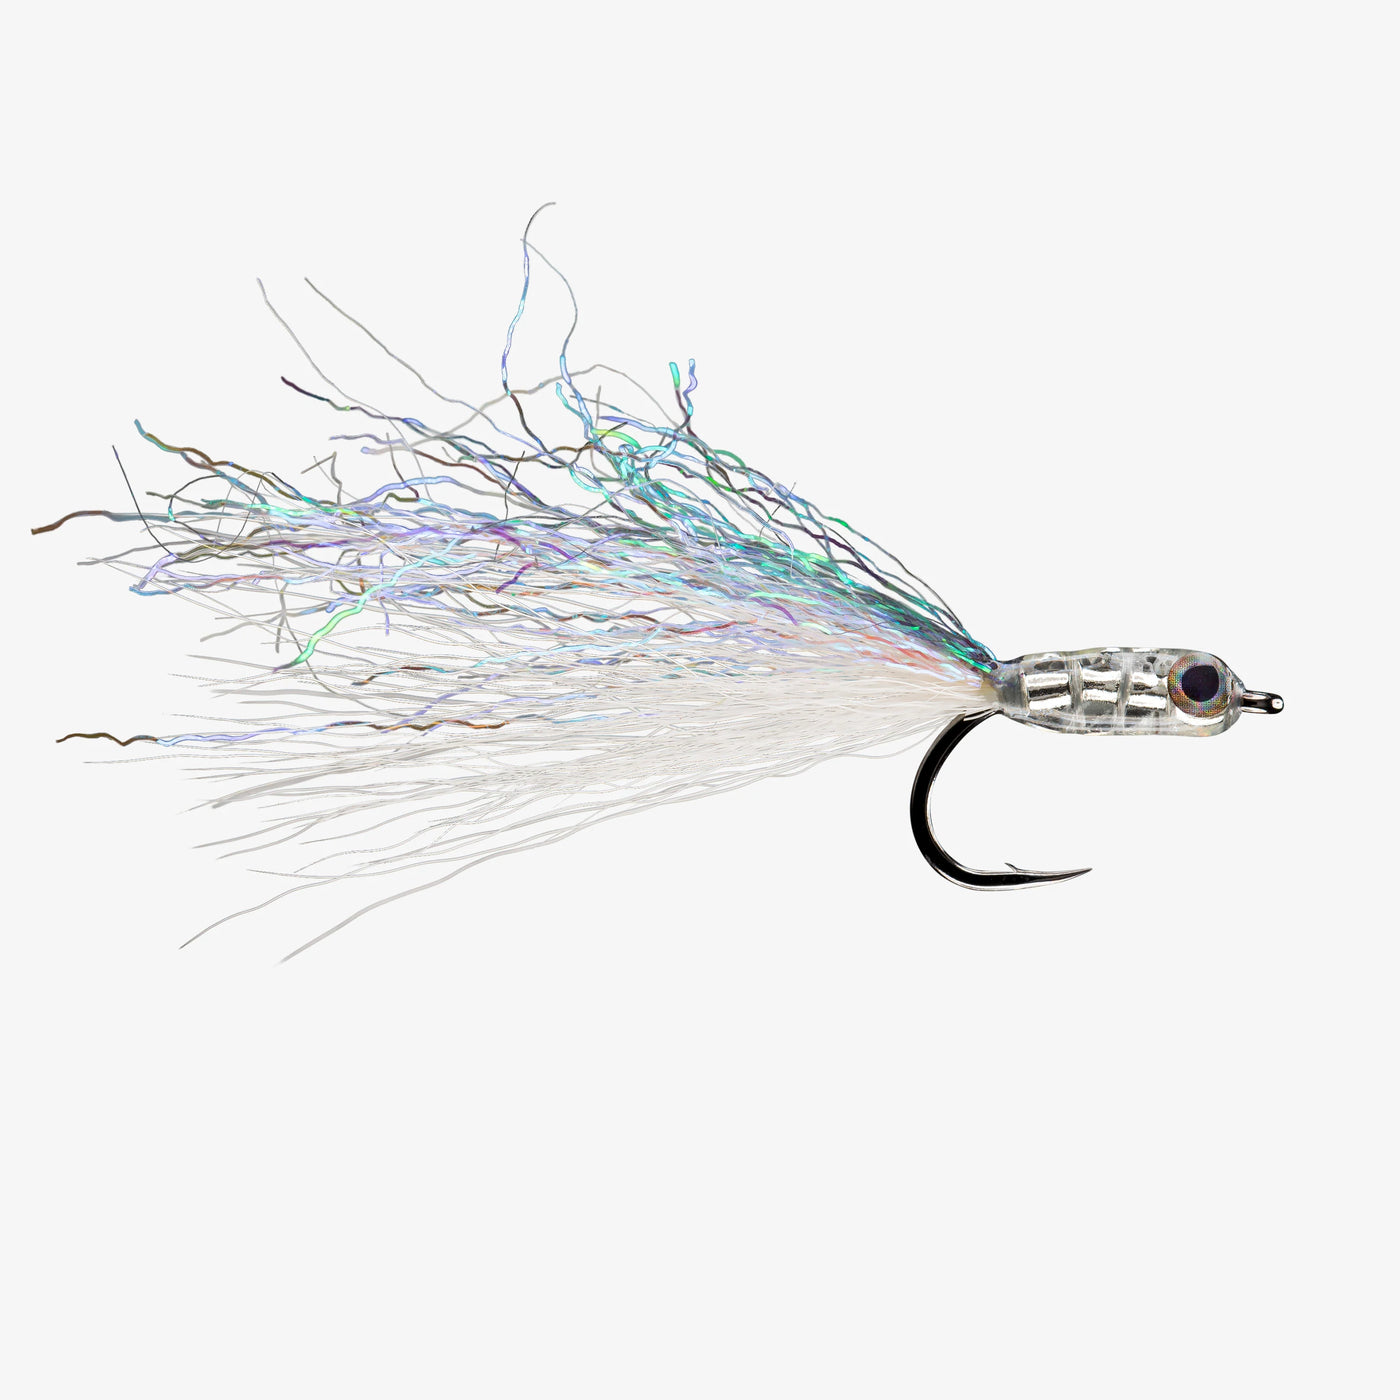 Rio's Nice Glass Flies – White Water Outfitters